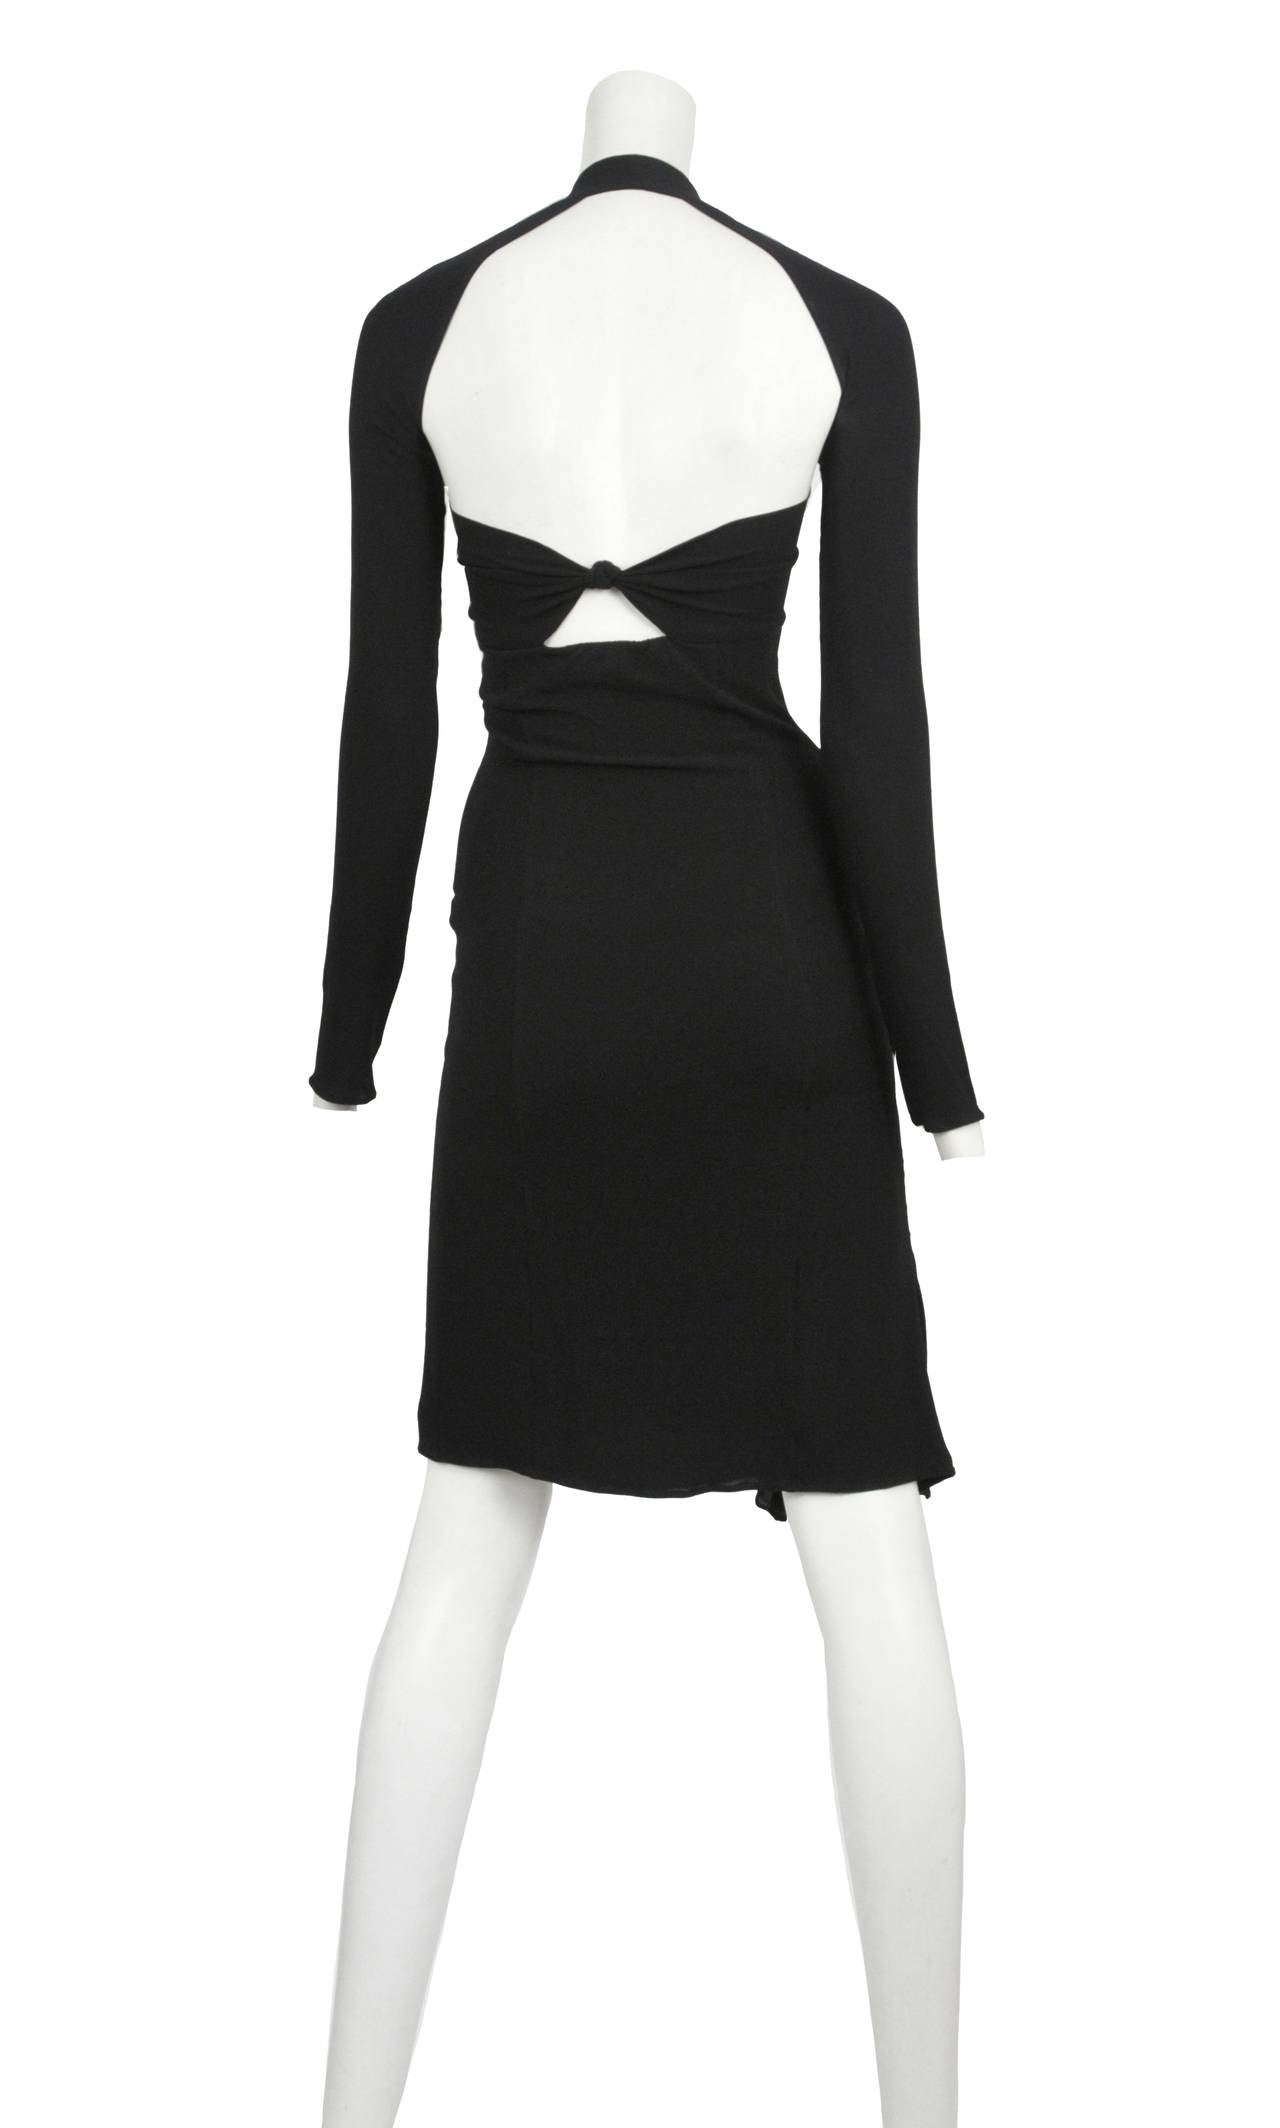 Tom Ford for Gucci black silk stretch dress with halter style neckline and cutout bodice with front slit. Open back has bow detail.